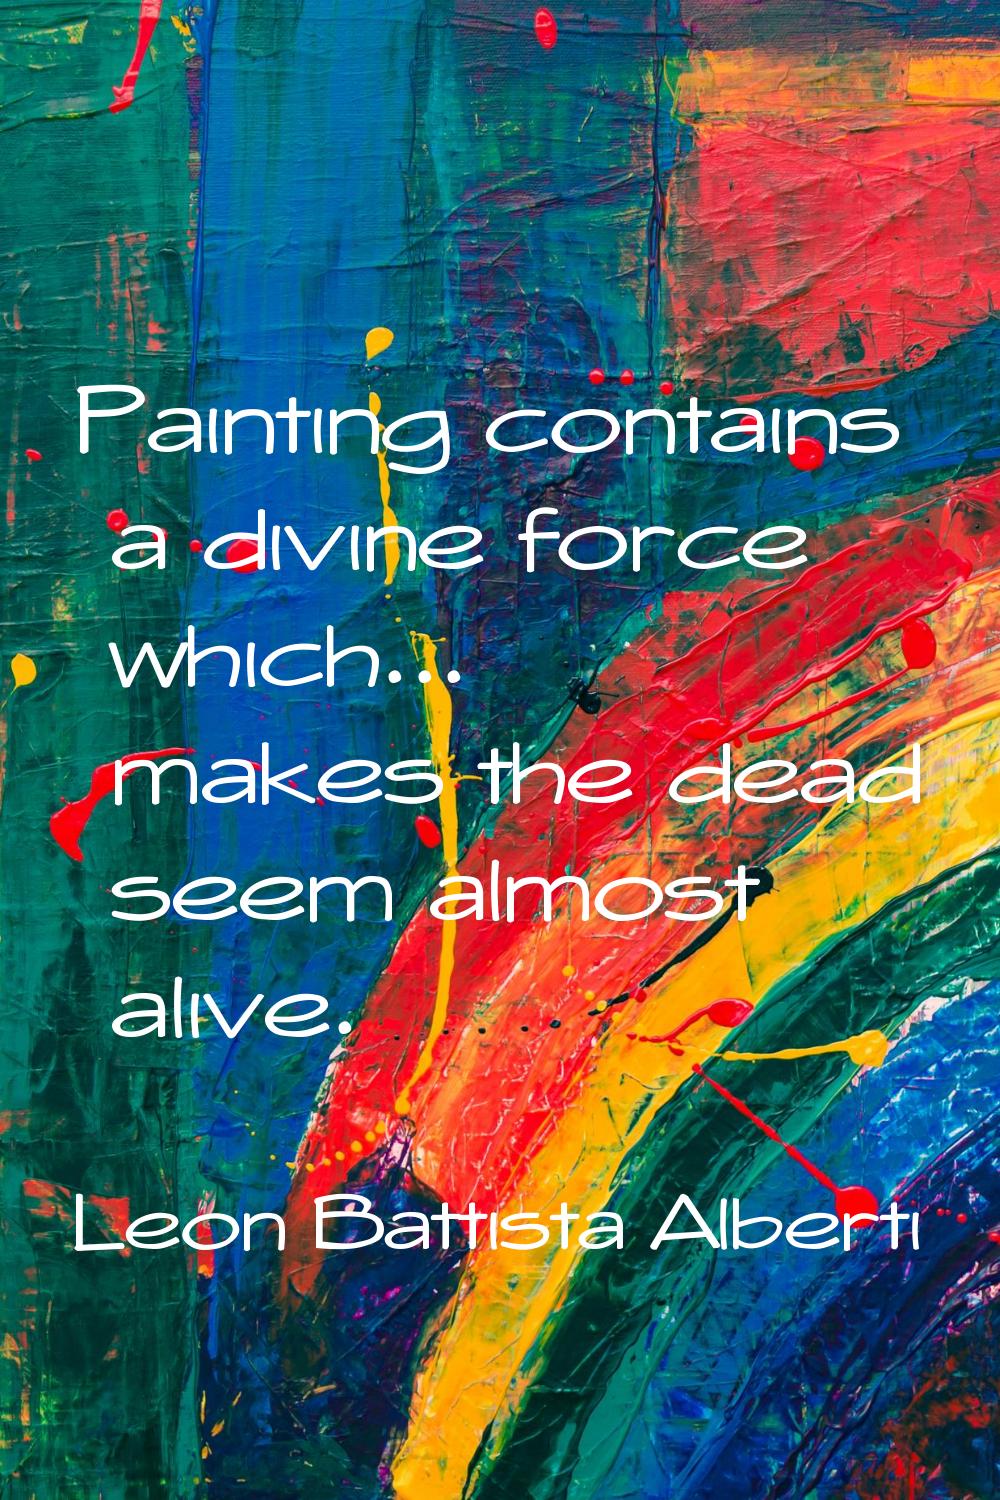 Painting contains a divine force which... makes the dead seem almost alive.